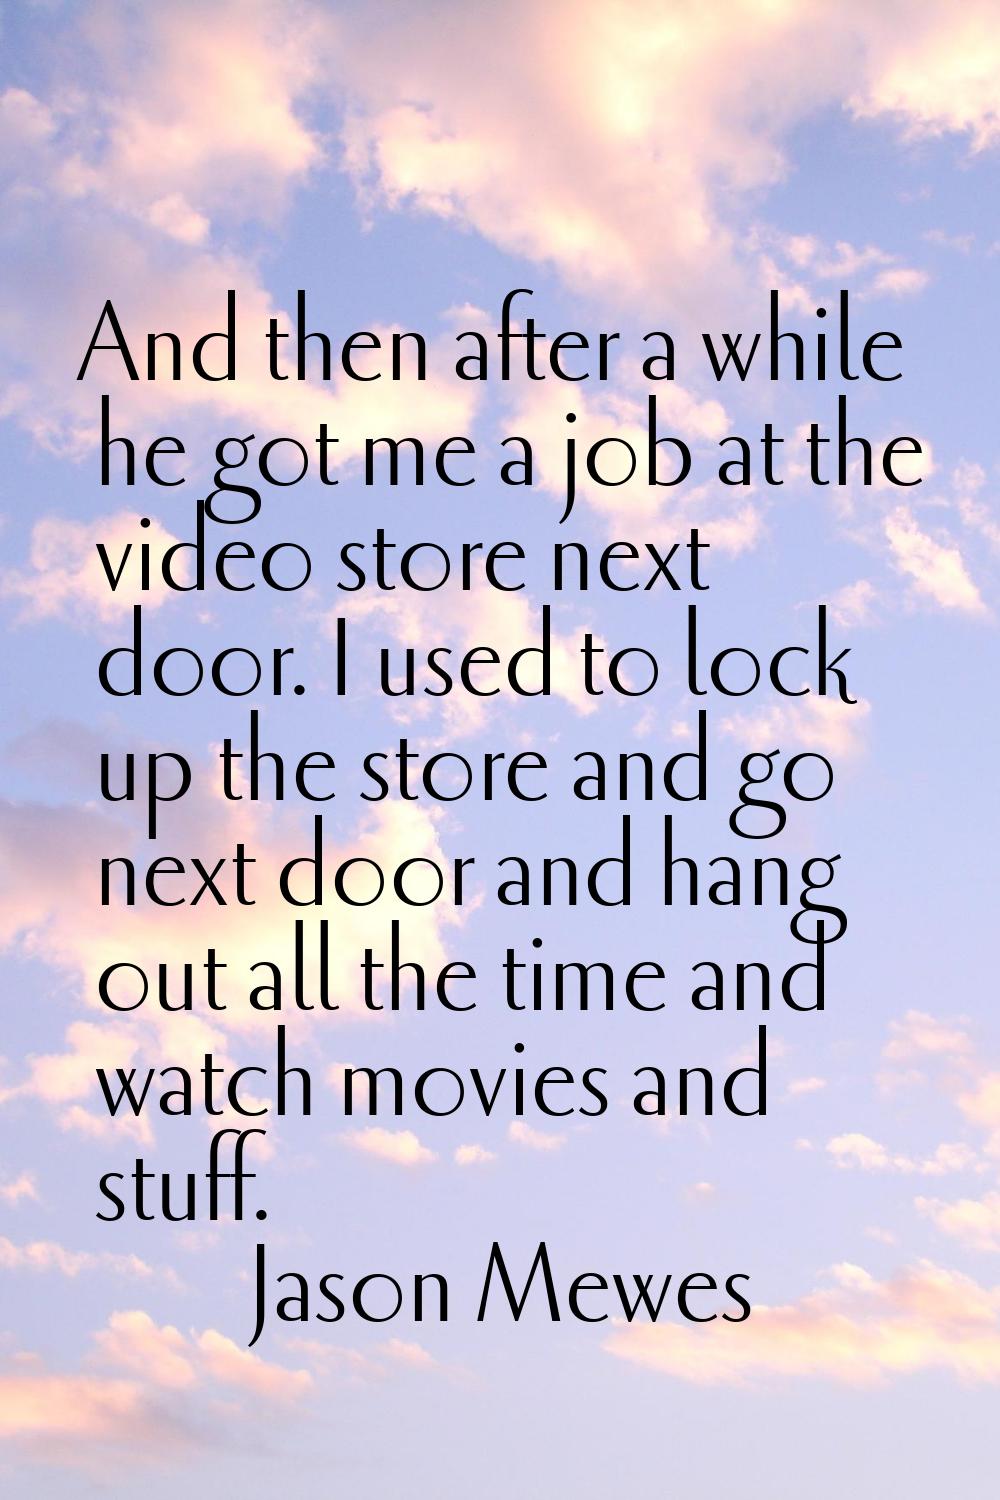 And then after a while he got me a job at the video store next door. I used to lock up the store an